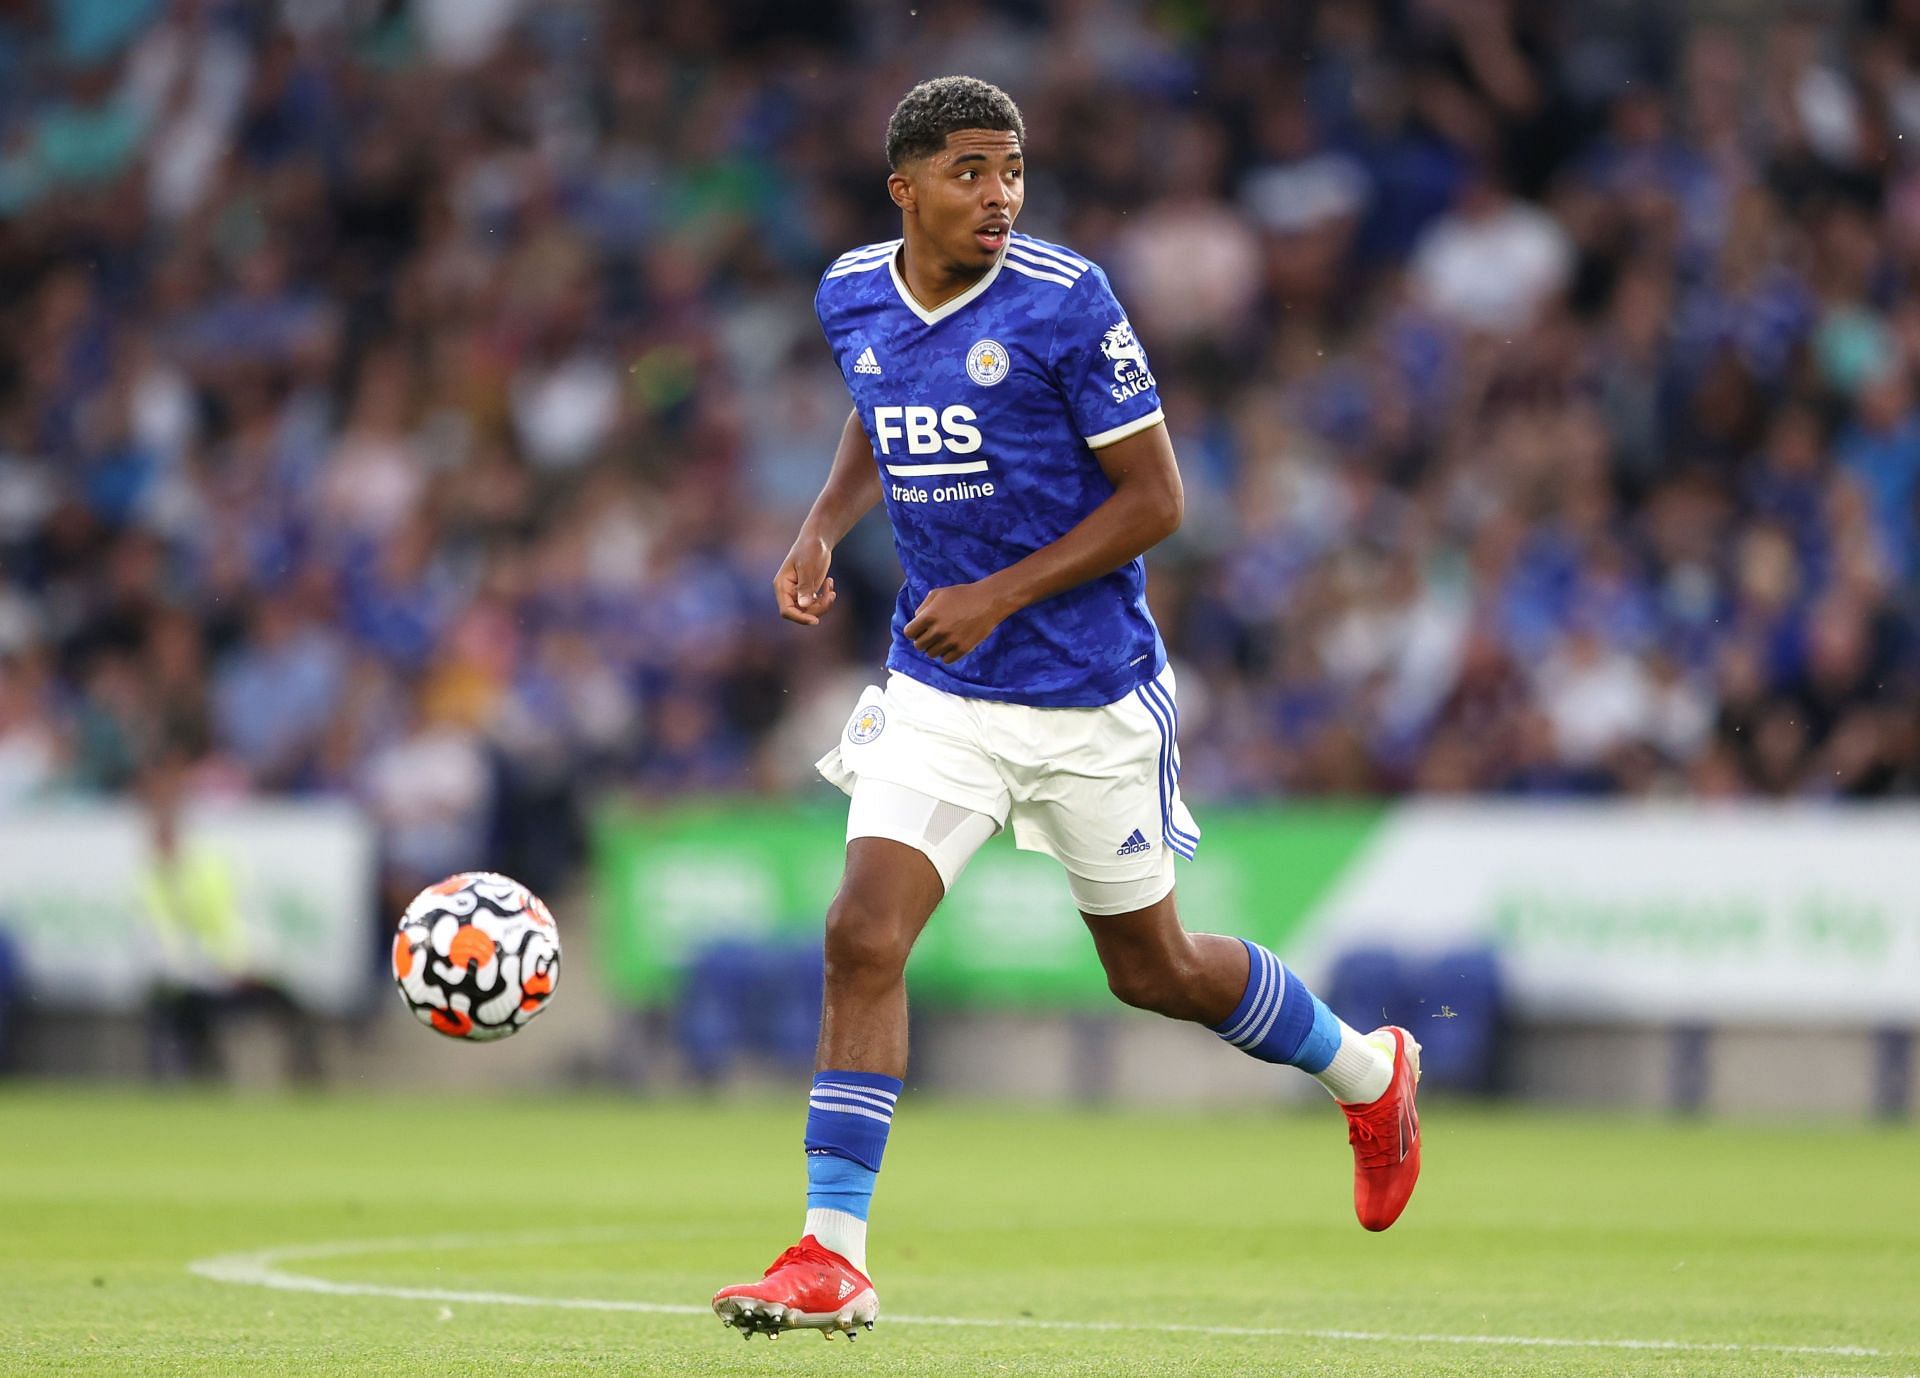 Chelsea have initiated contact with Wesley Fofana.